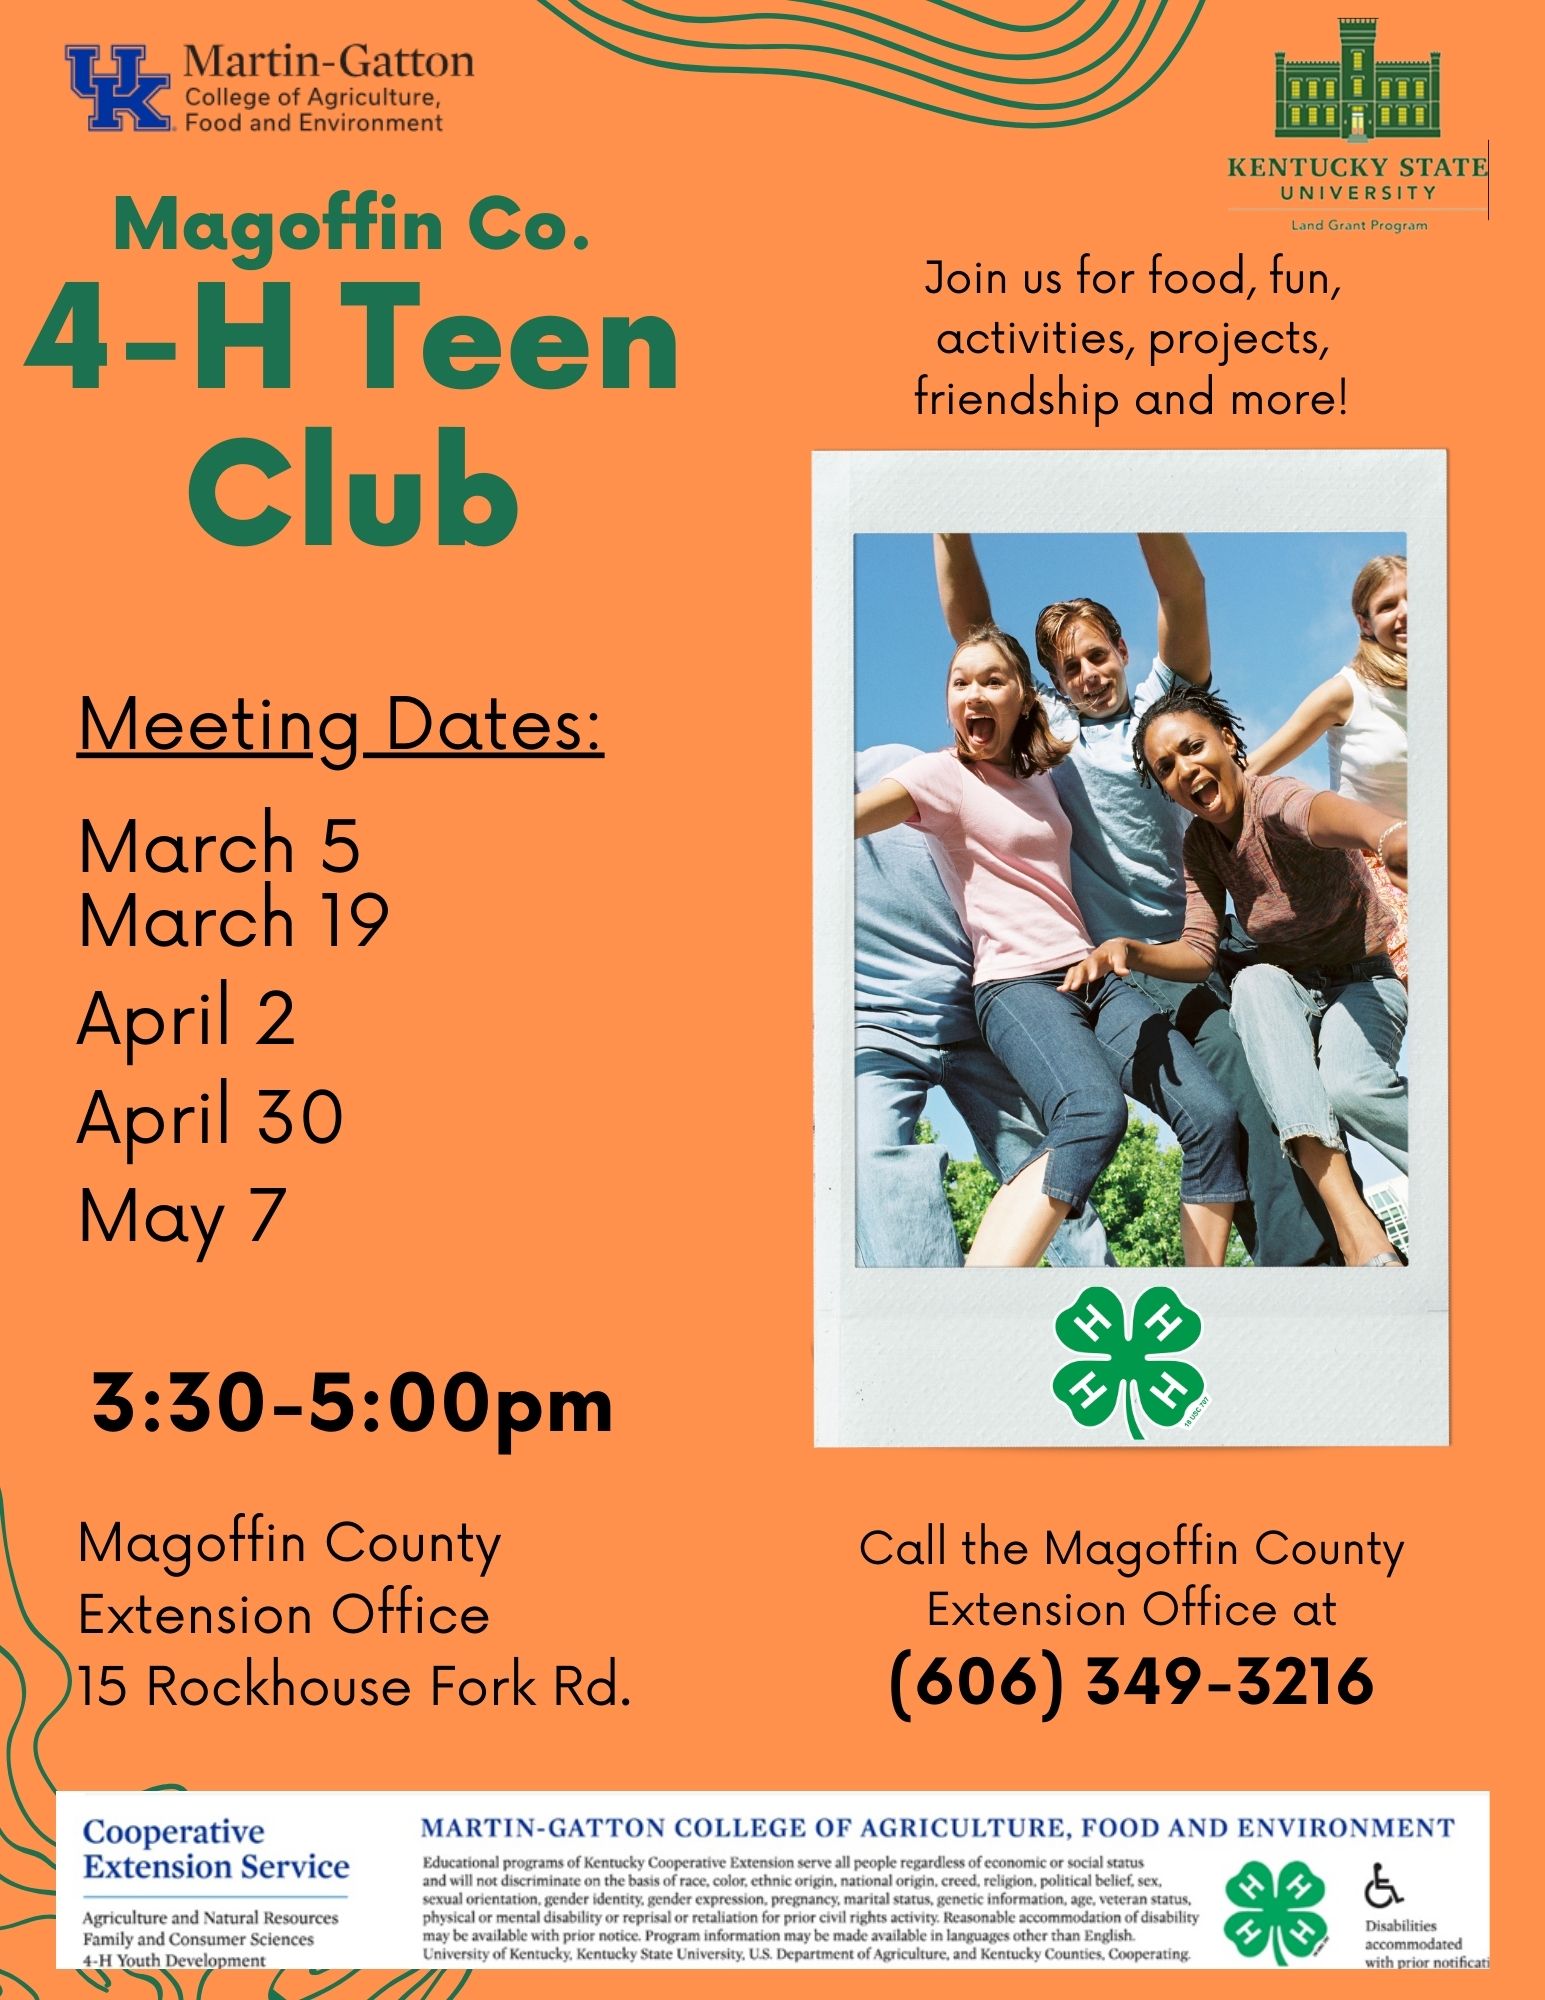 4-H Teen Club meeting dates and times